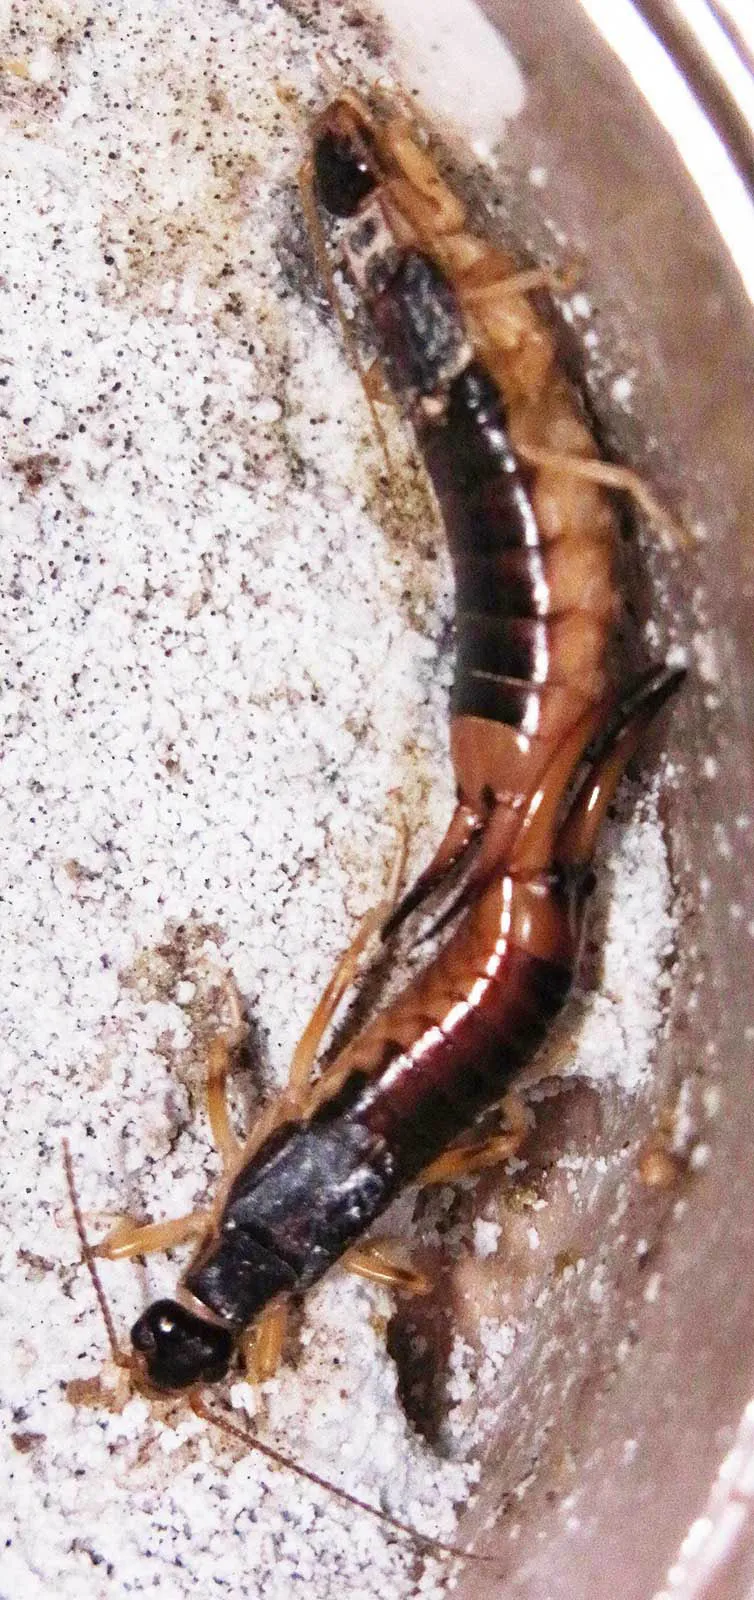 Half of These Earwigs Use Their Right Penis. The Other Half Use Their Left Penis. Why?